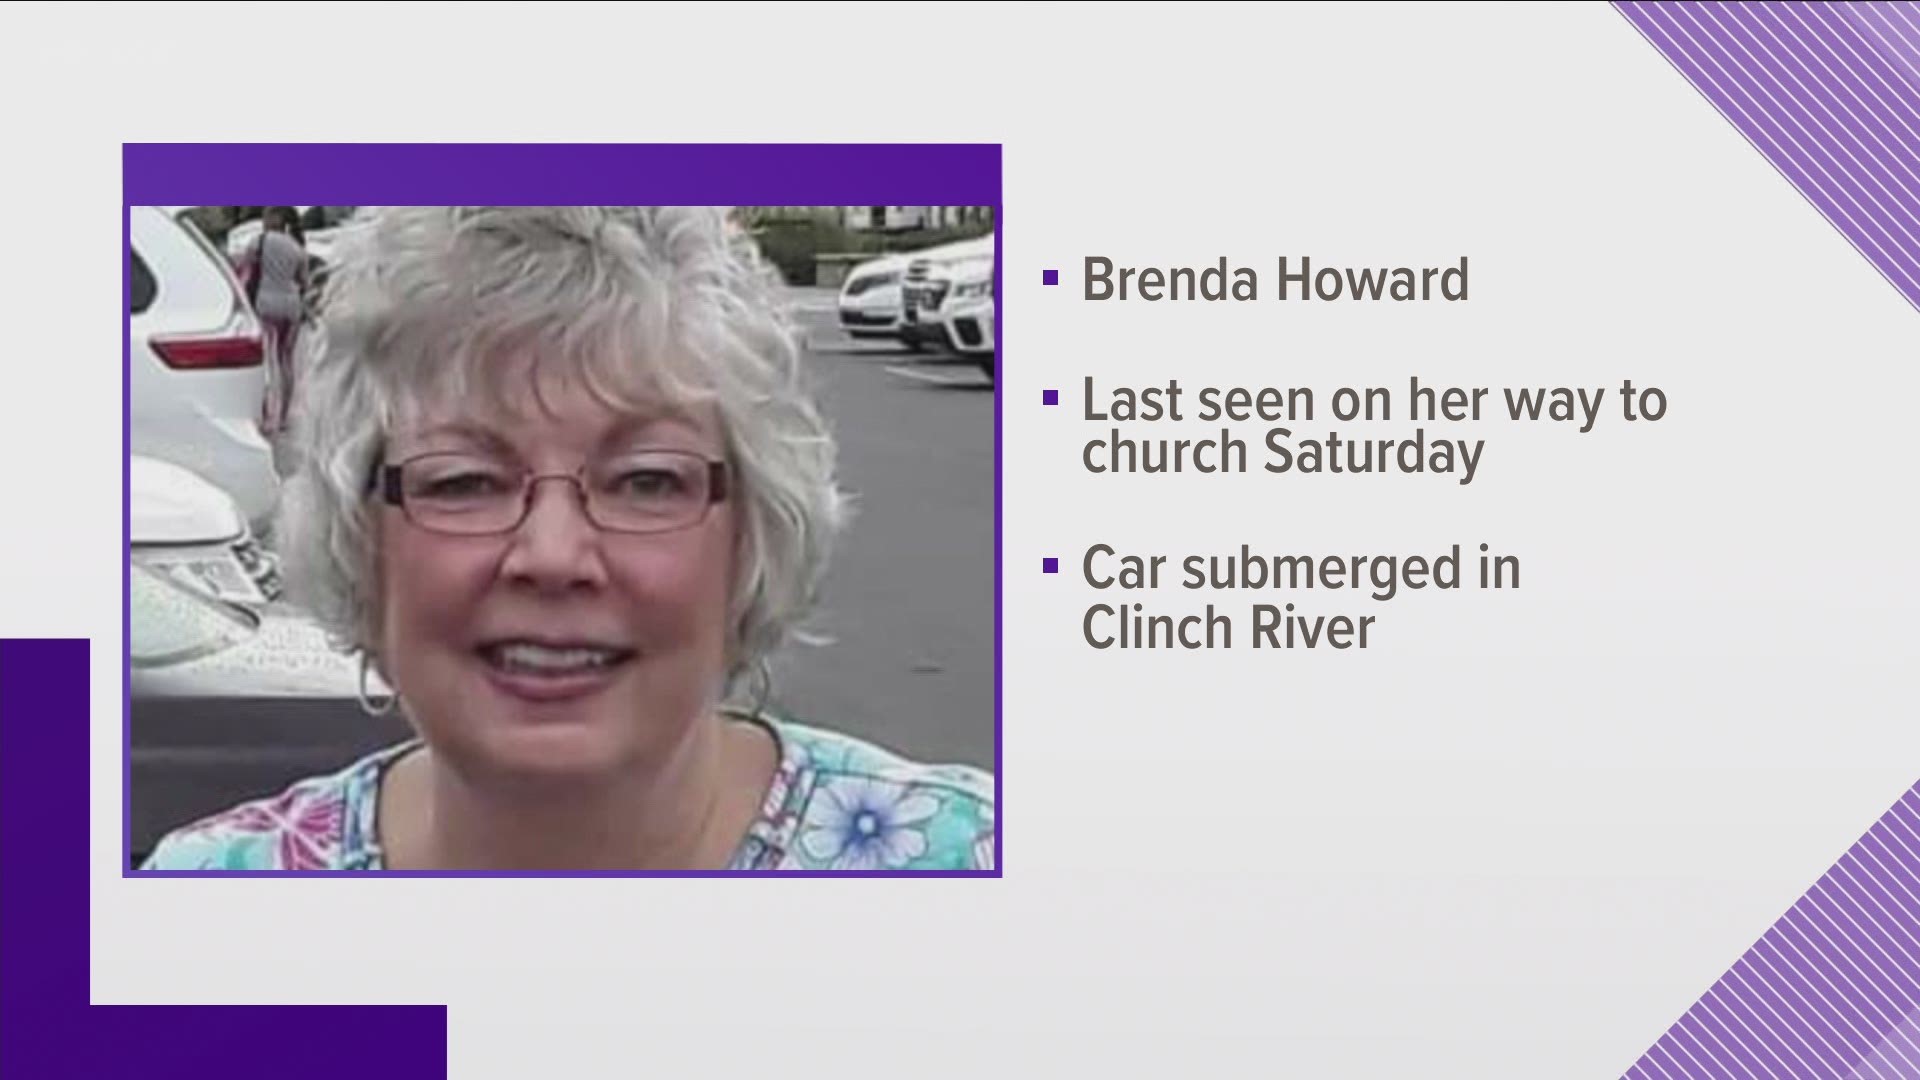 The TBI said Brenda Howard, 67, who had been missing in Hancock County, has been found dead.